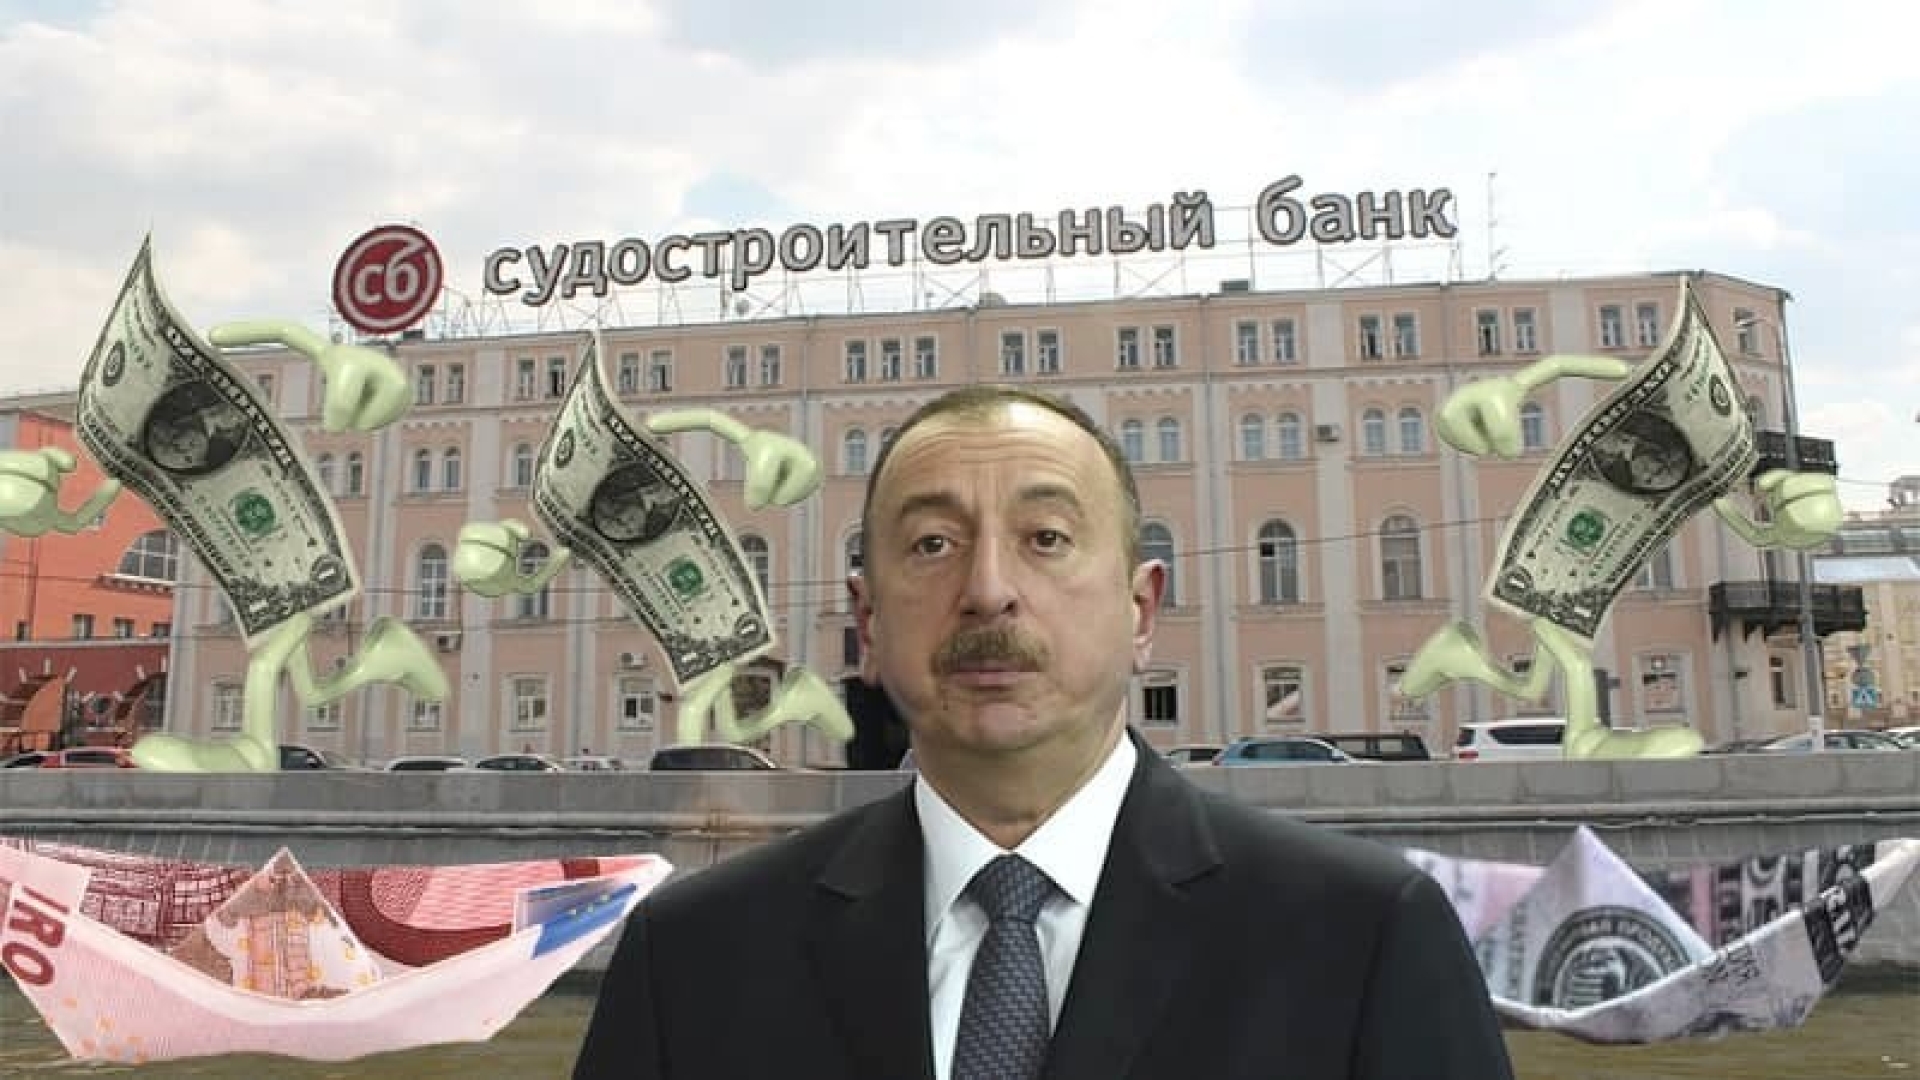 Aliyev's daughters "made" billions with SK-Bank?